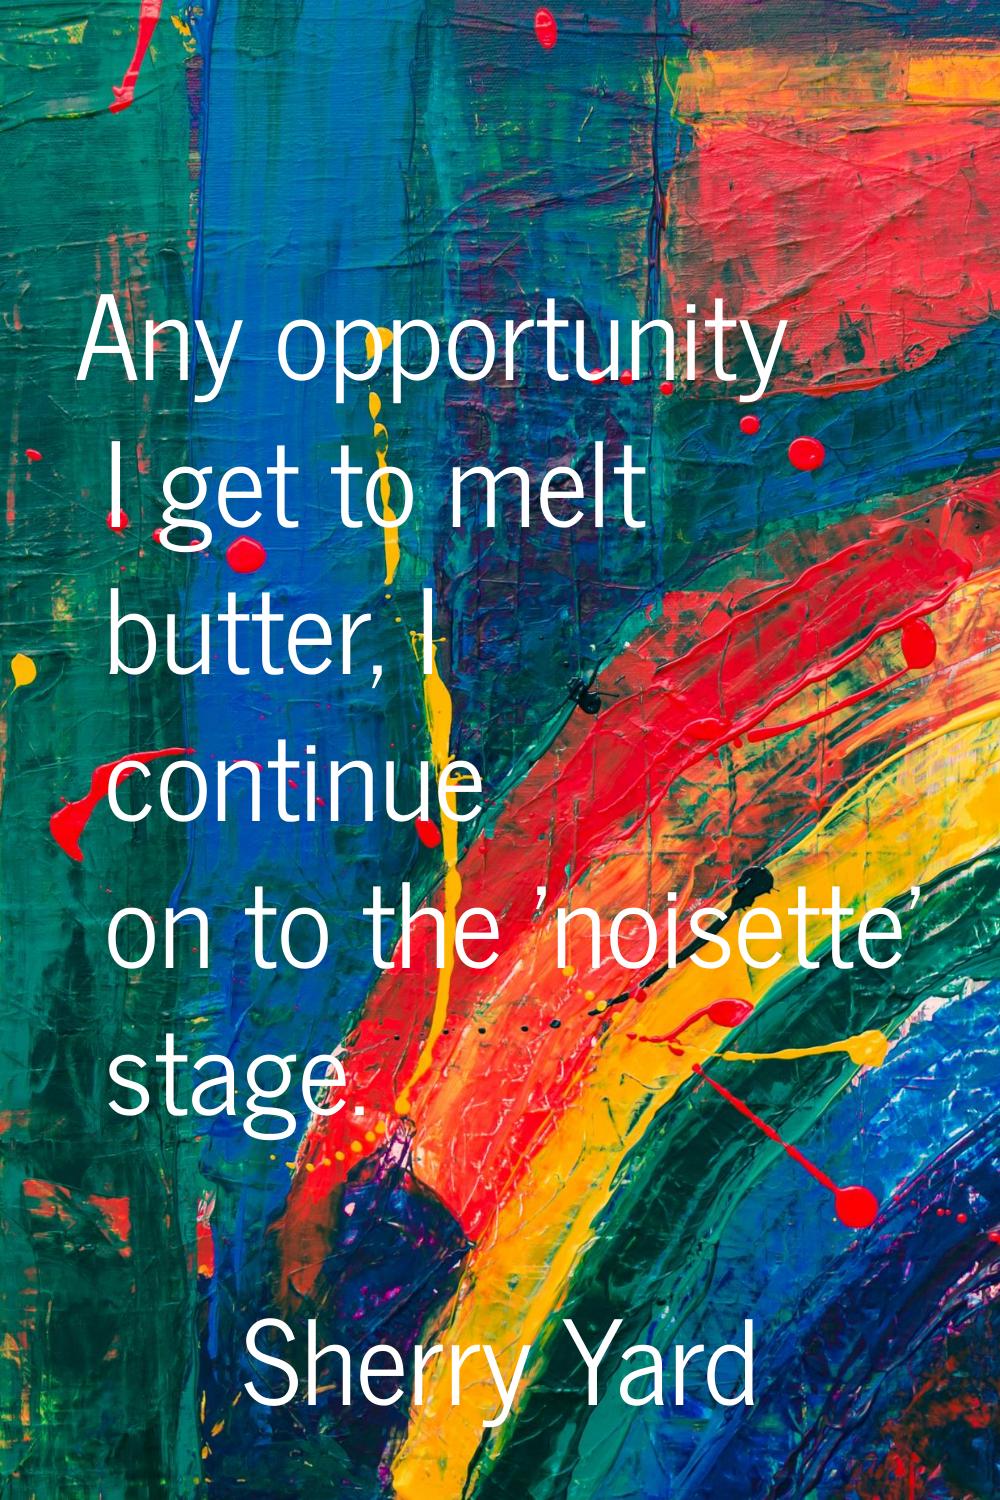 Any opportunity I get to melt butter, I continue on to the 'noisette' stage.